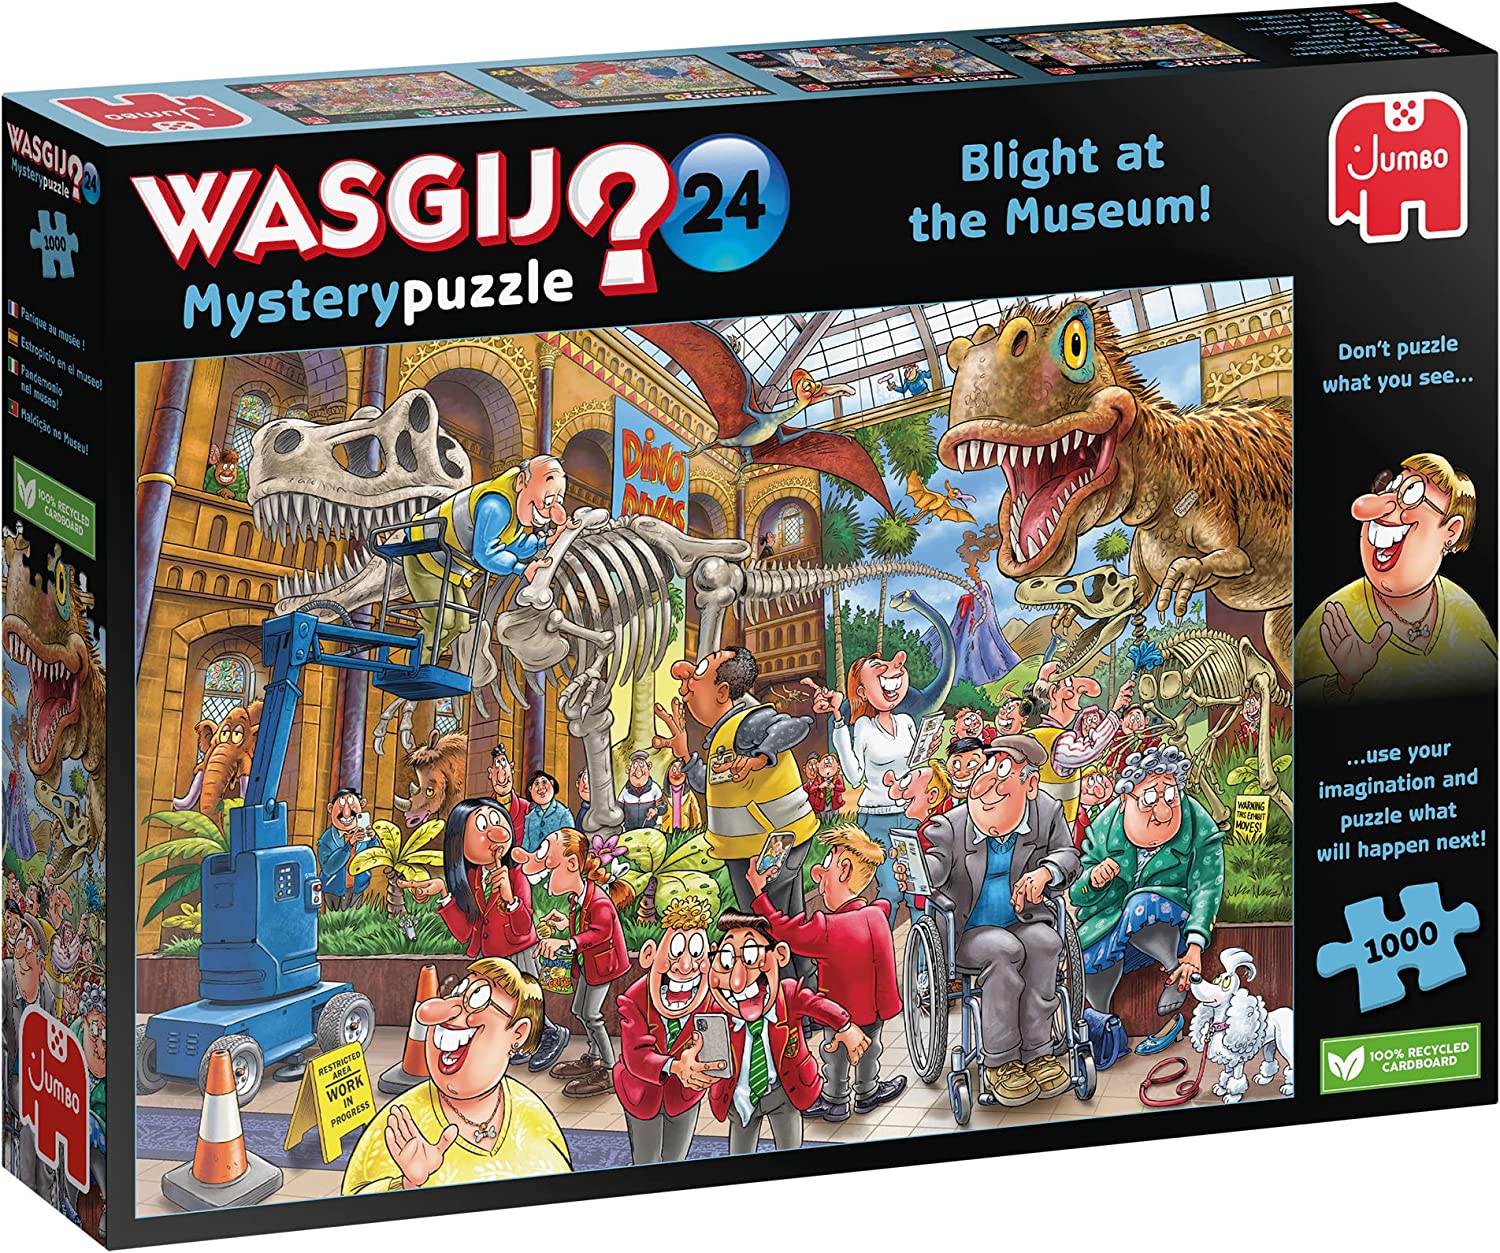 Wasgij - Blight at the Museum